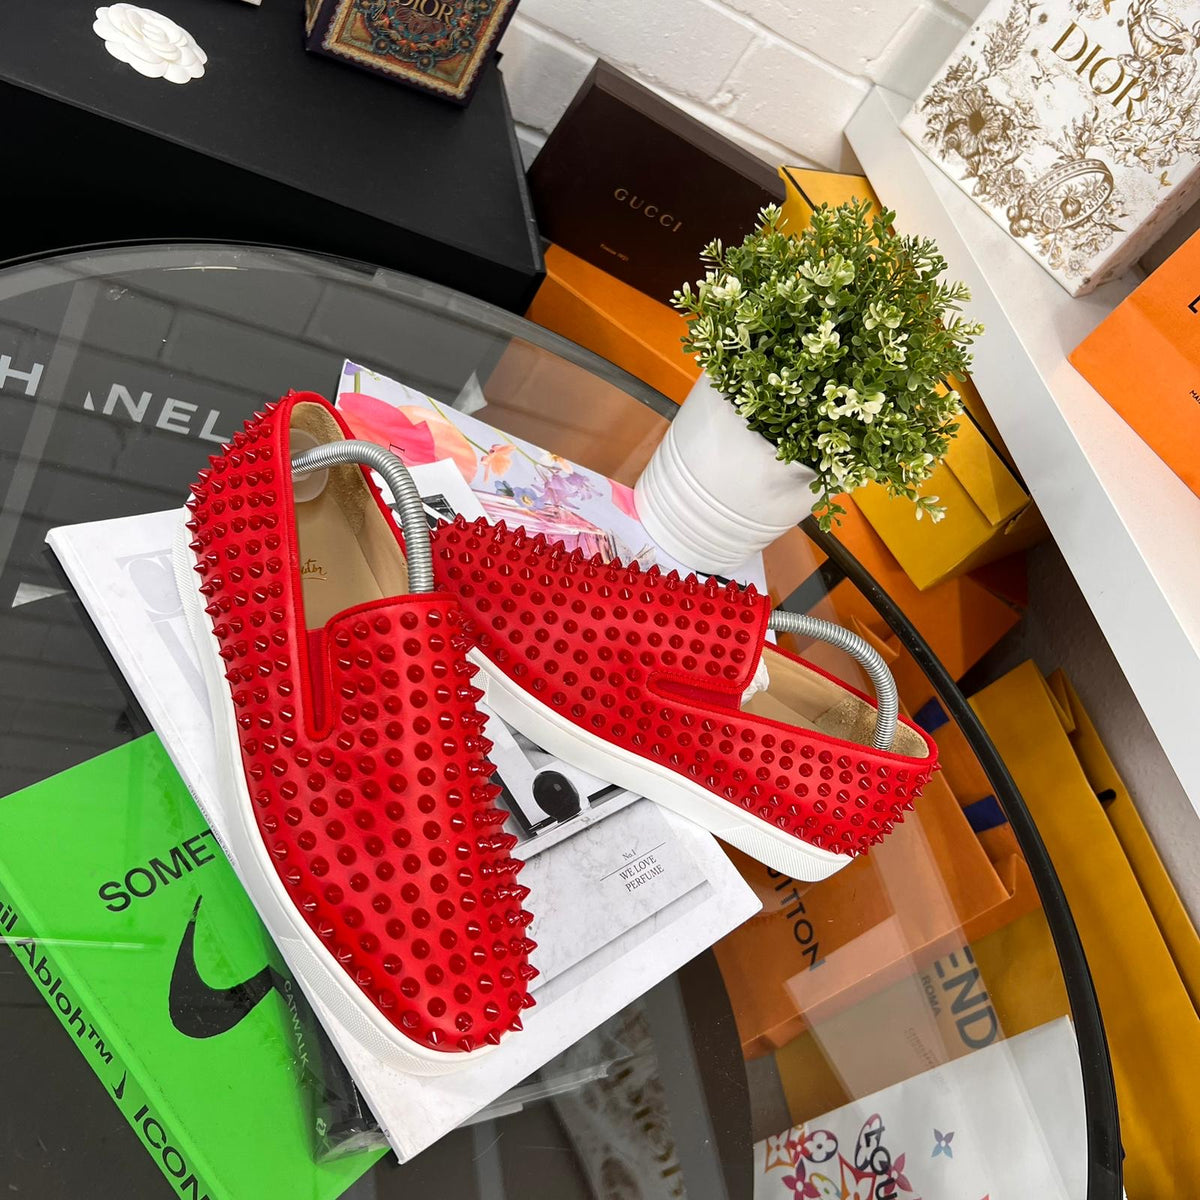 Christian Louboutin Red Leather Rollerboy Spikes Slip on Smoking Slippers Size 42